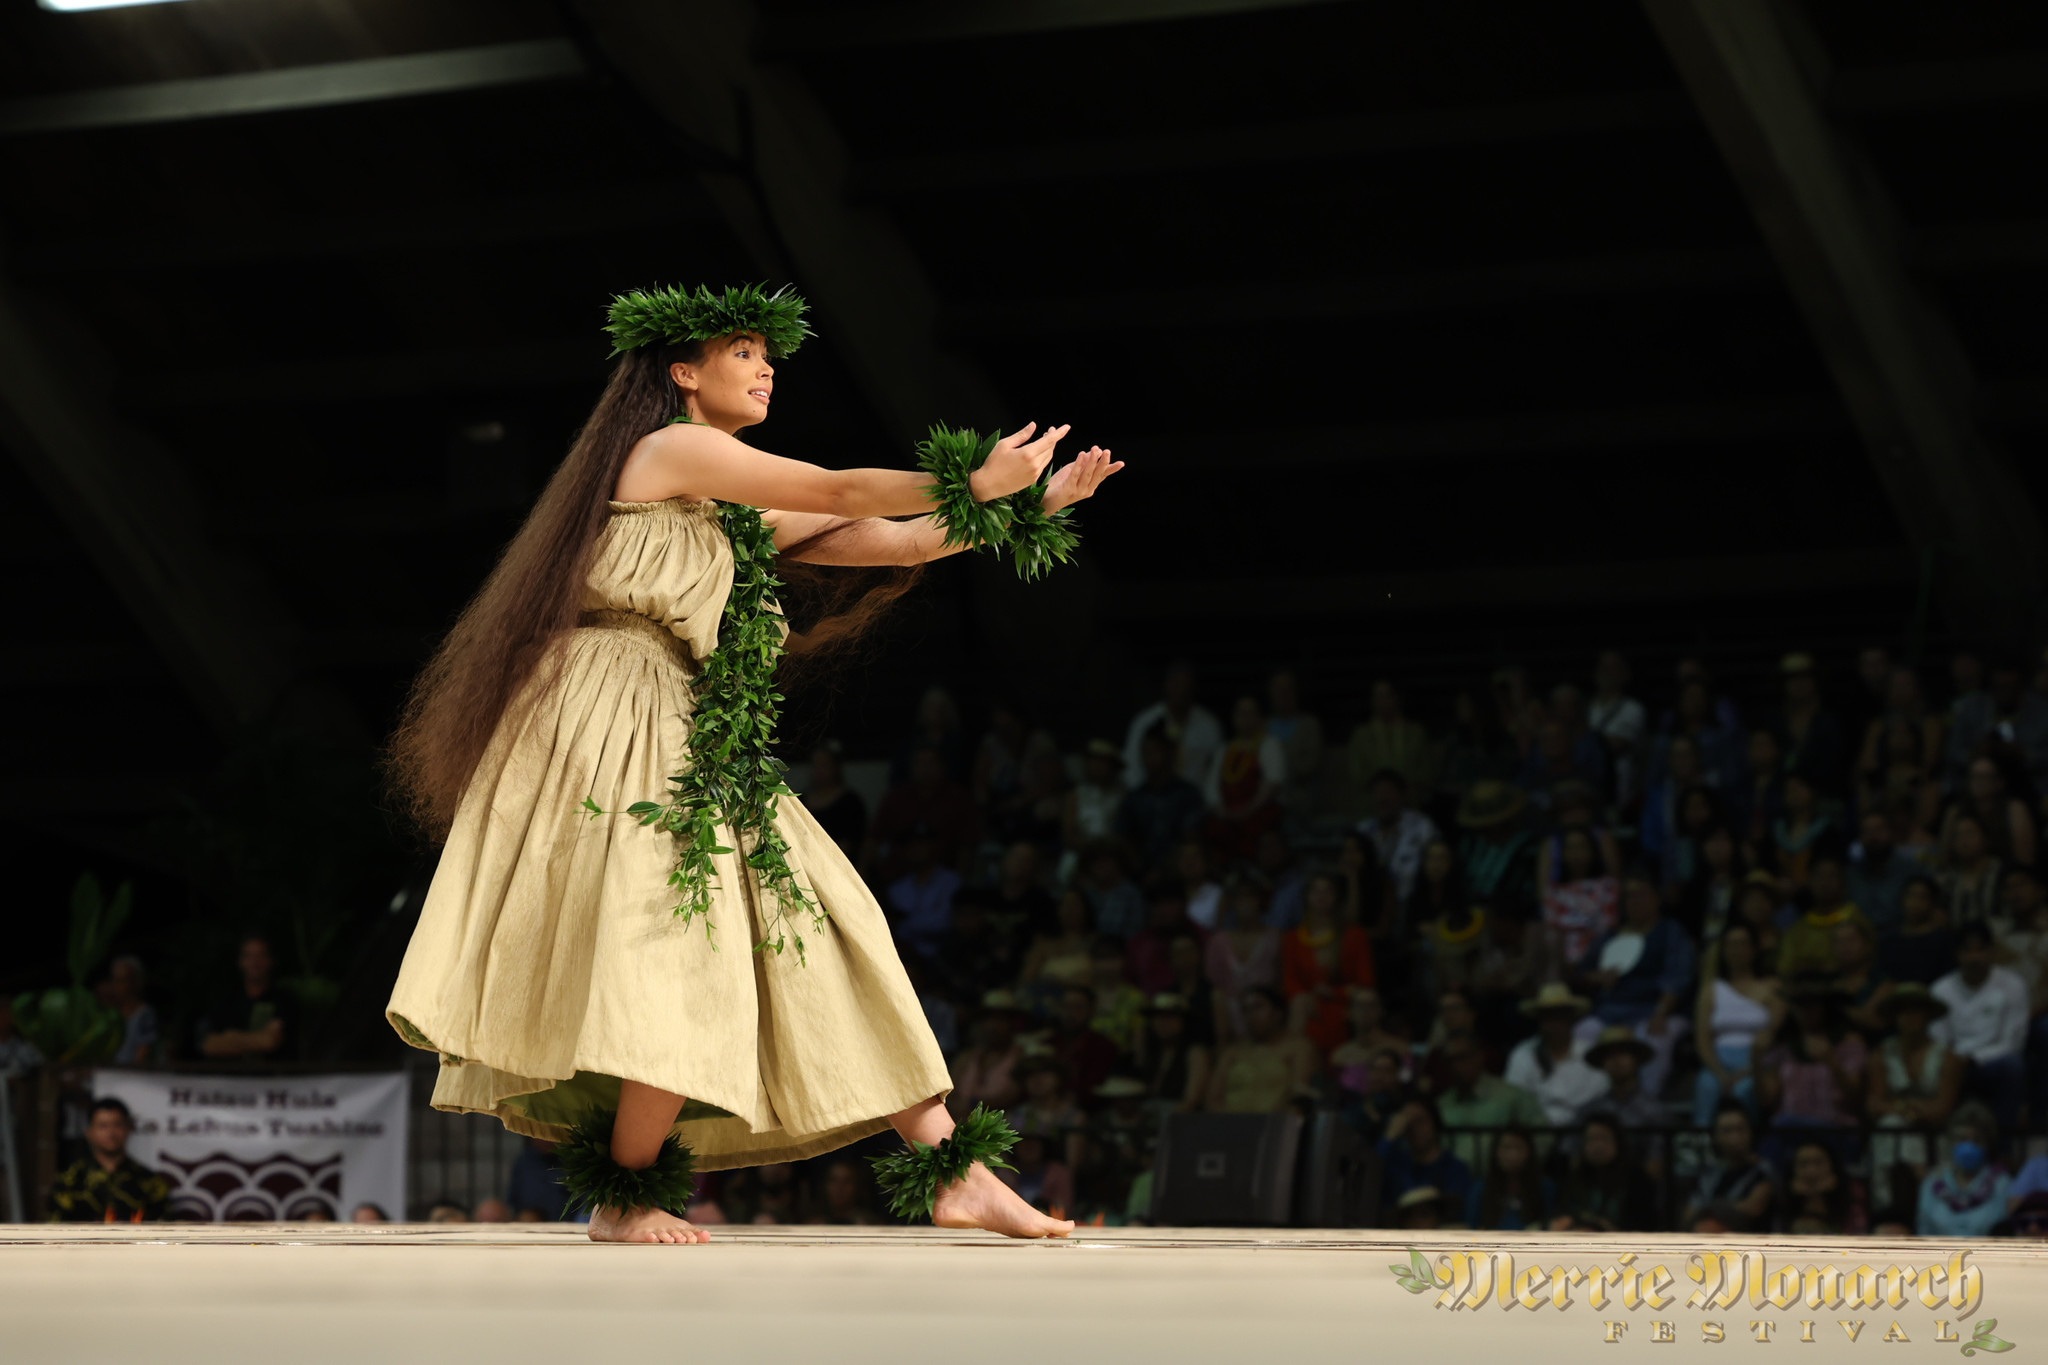 Miss Aloha Hula 2023 Thornas Brown Crowned at the 60th Anniversary of